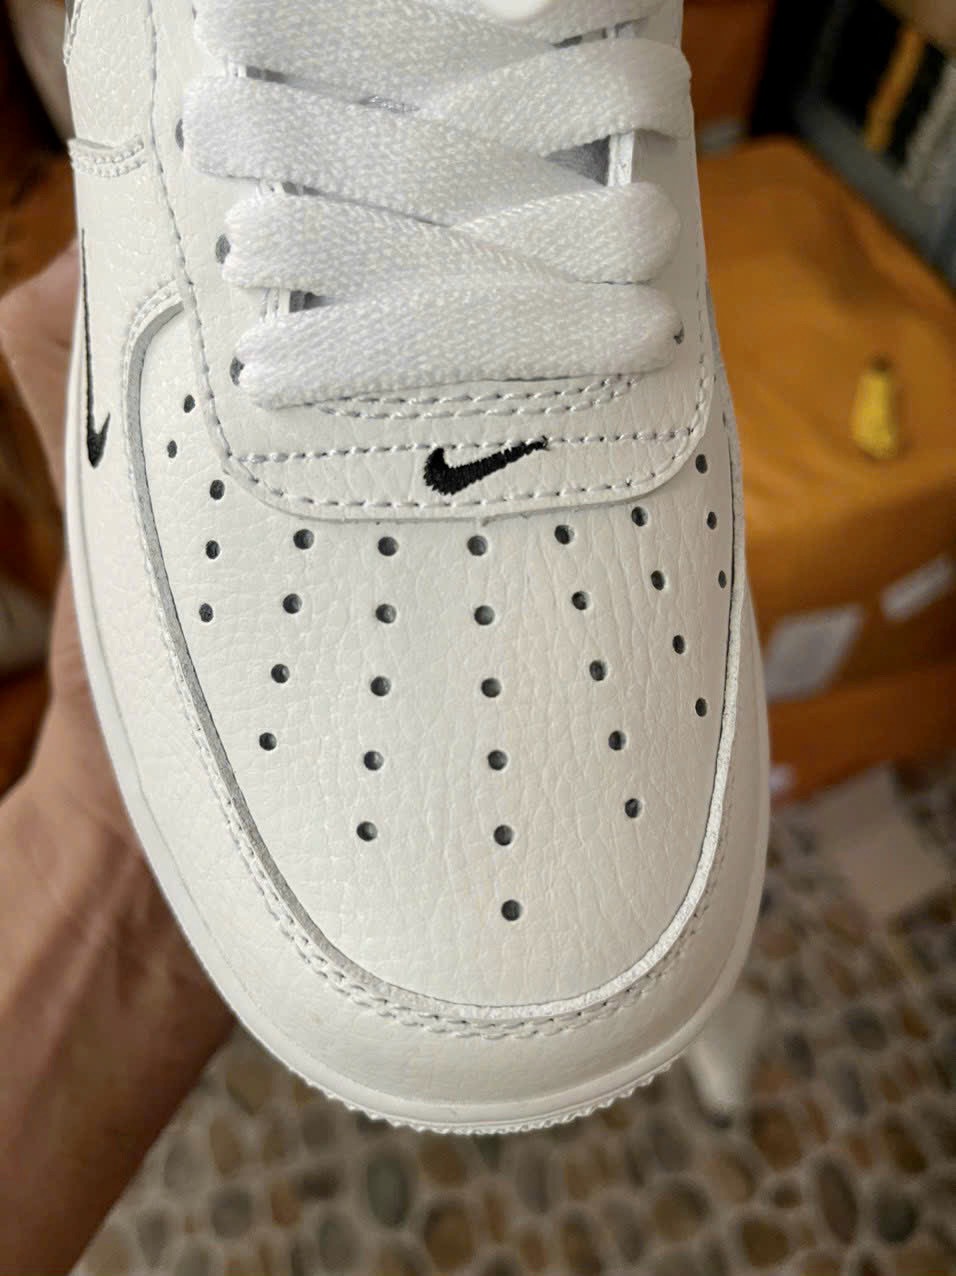 Giày Nike Air Force 1 Low Reflective Swoosh White Black Best Quality